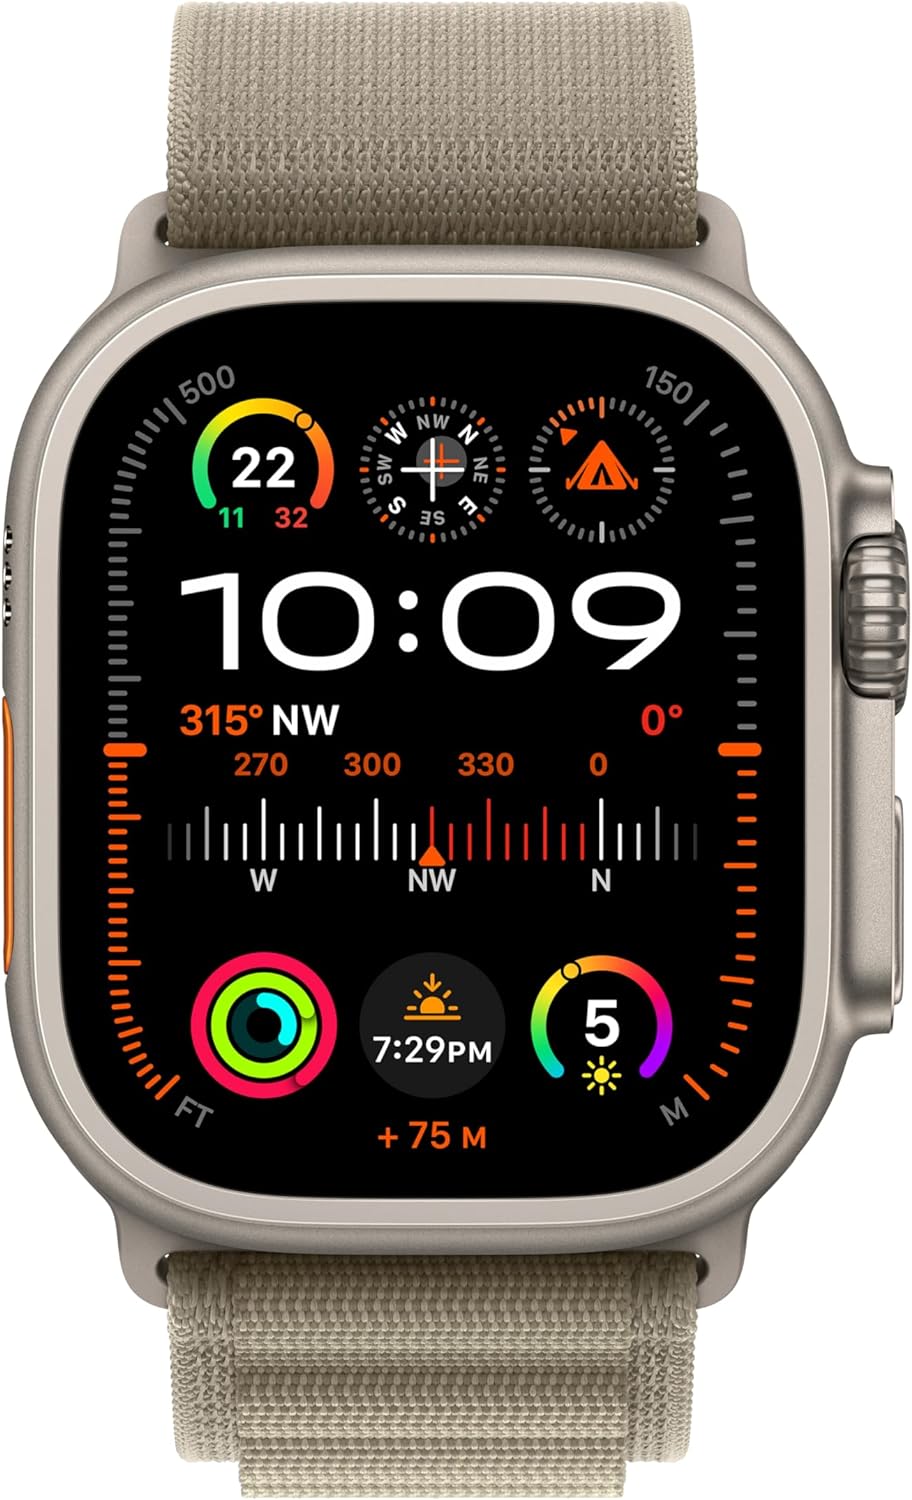 Rugged 49mm Apple Watch Ultra 2 with Cellular Capability - SKU: 0194253829515